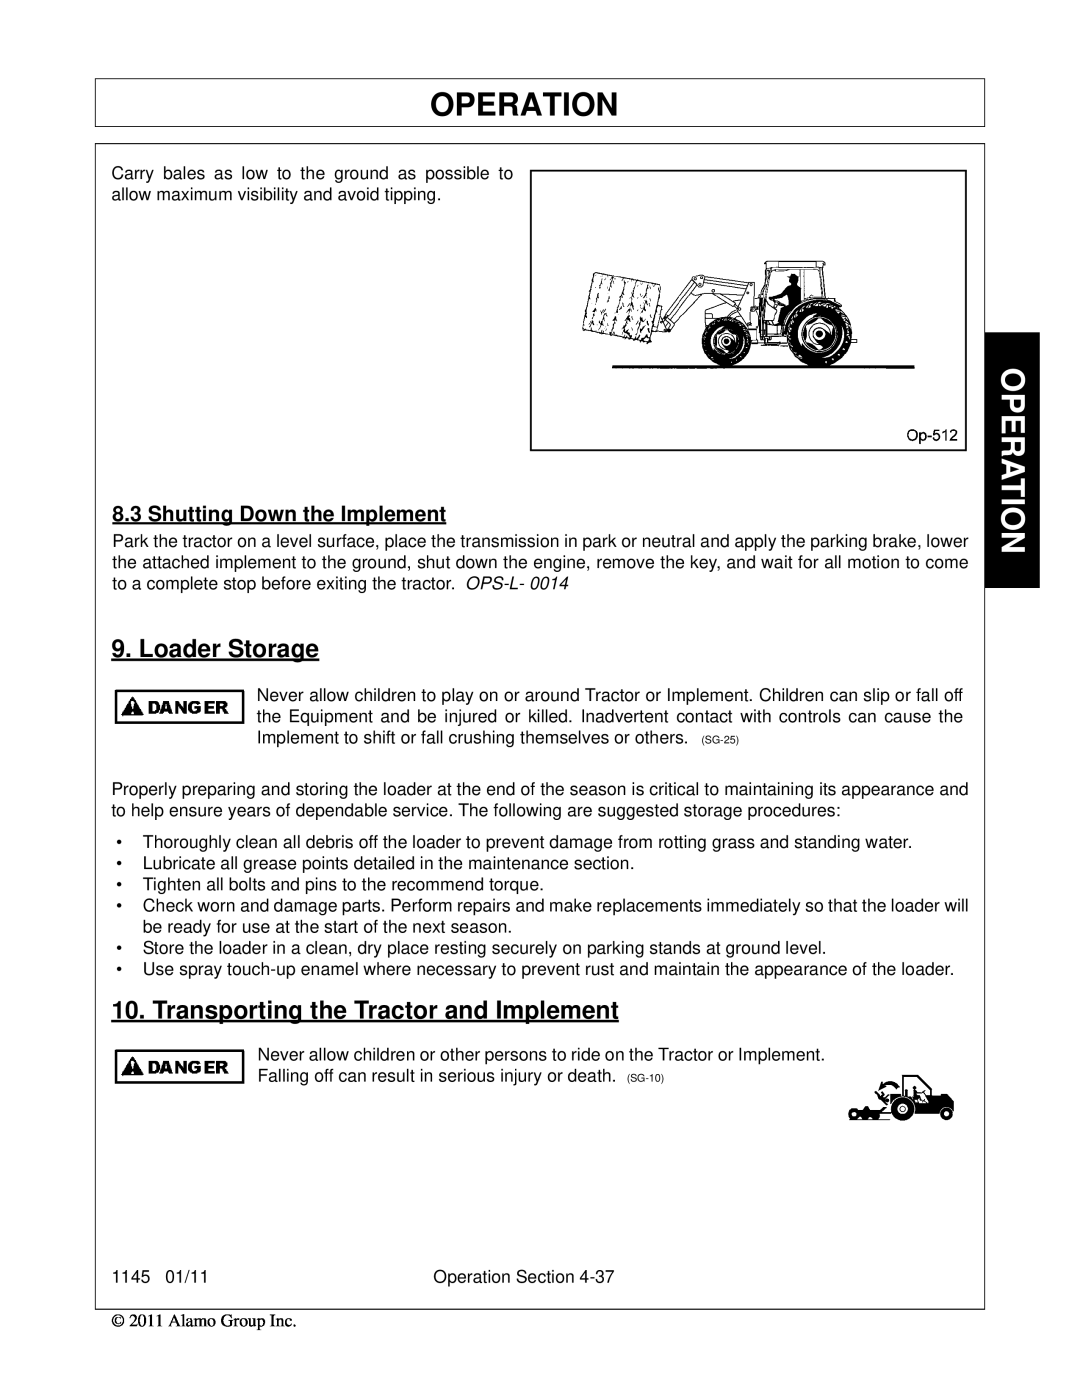 Bush Hog 1145 manual Operation, Loader Storage, Transporting the Tractor and Implement, Shutting Down the Implement 